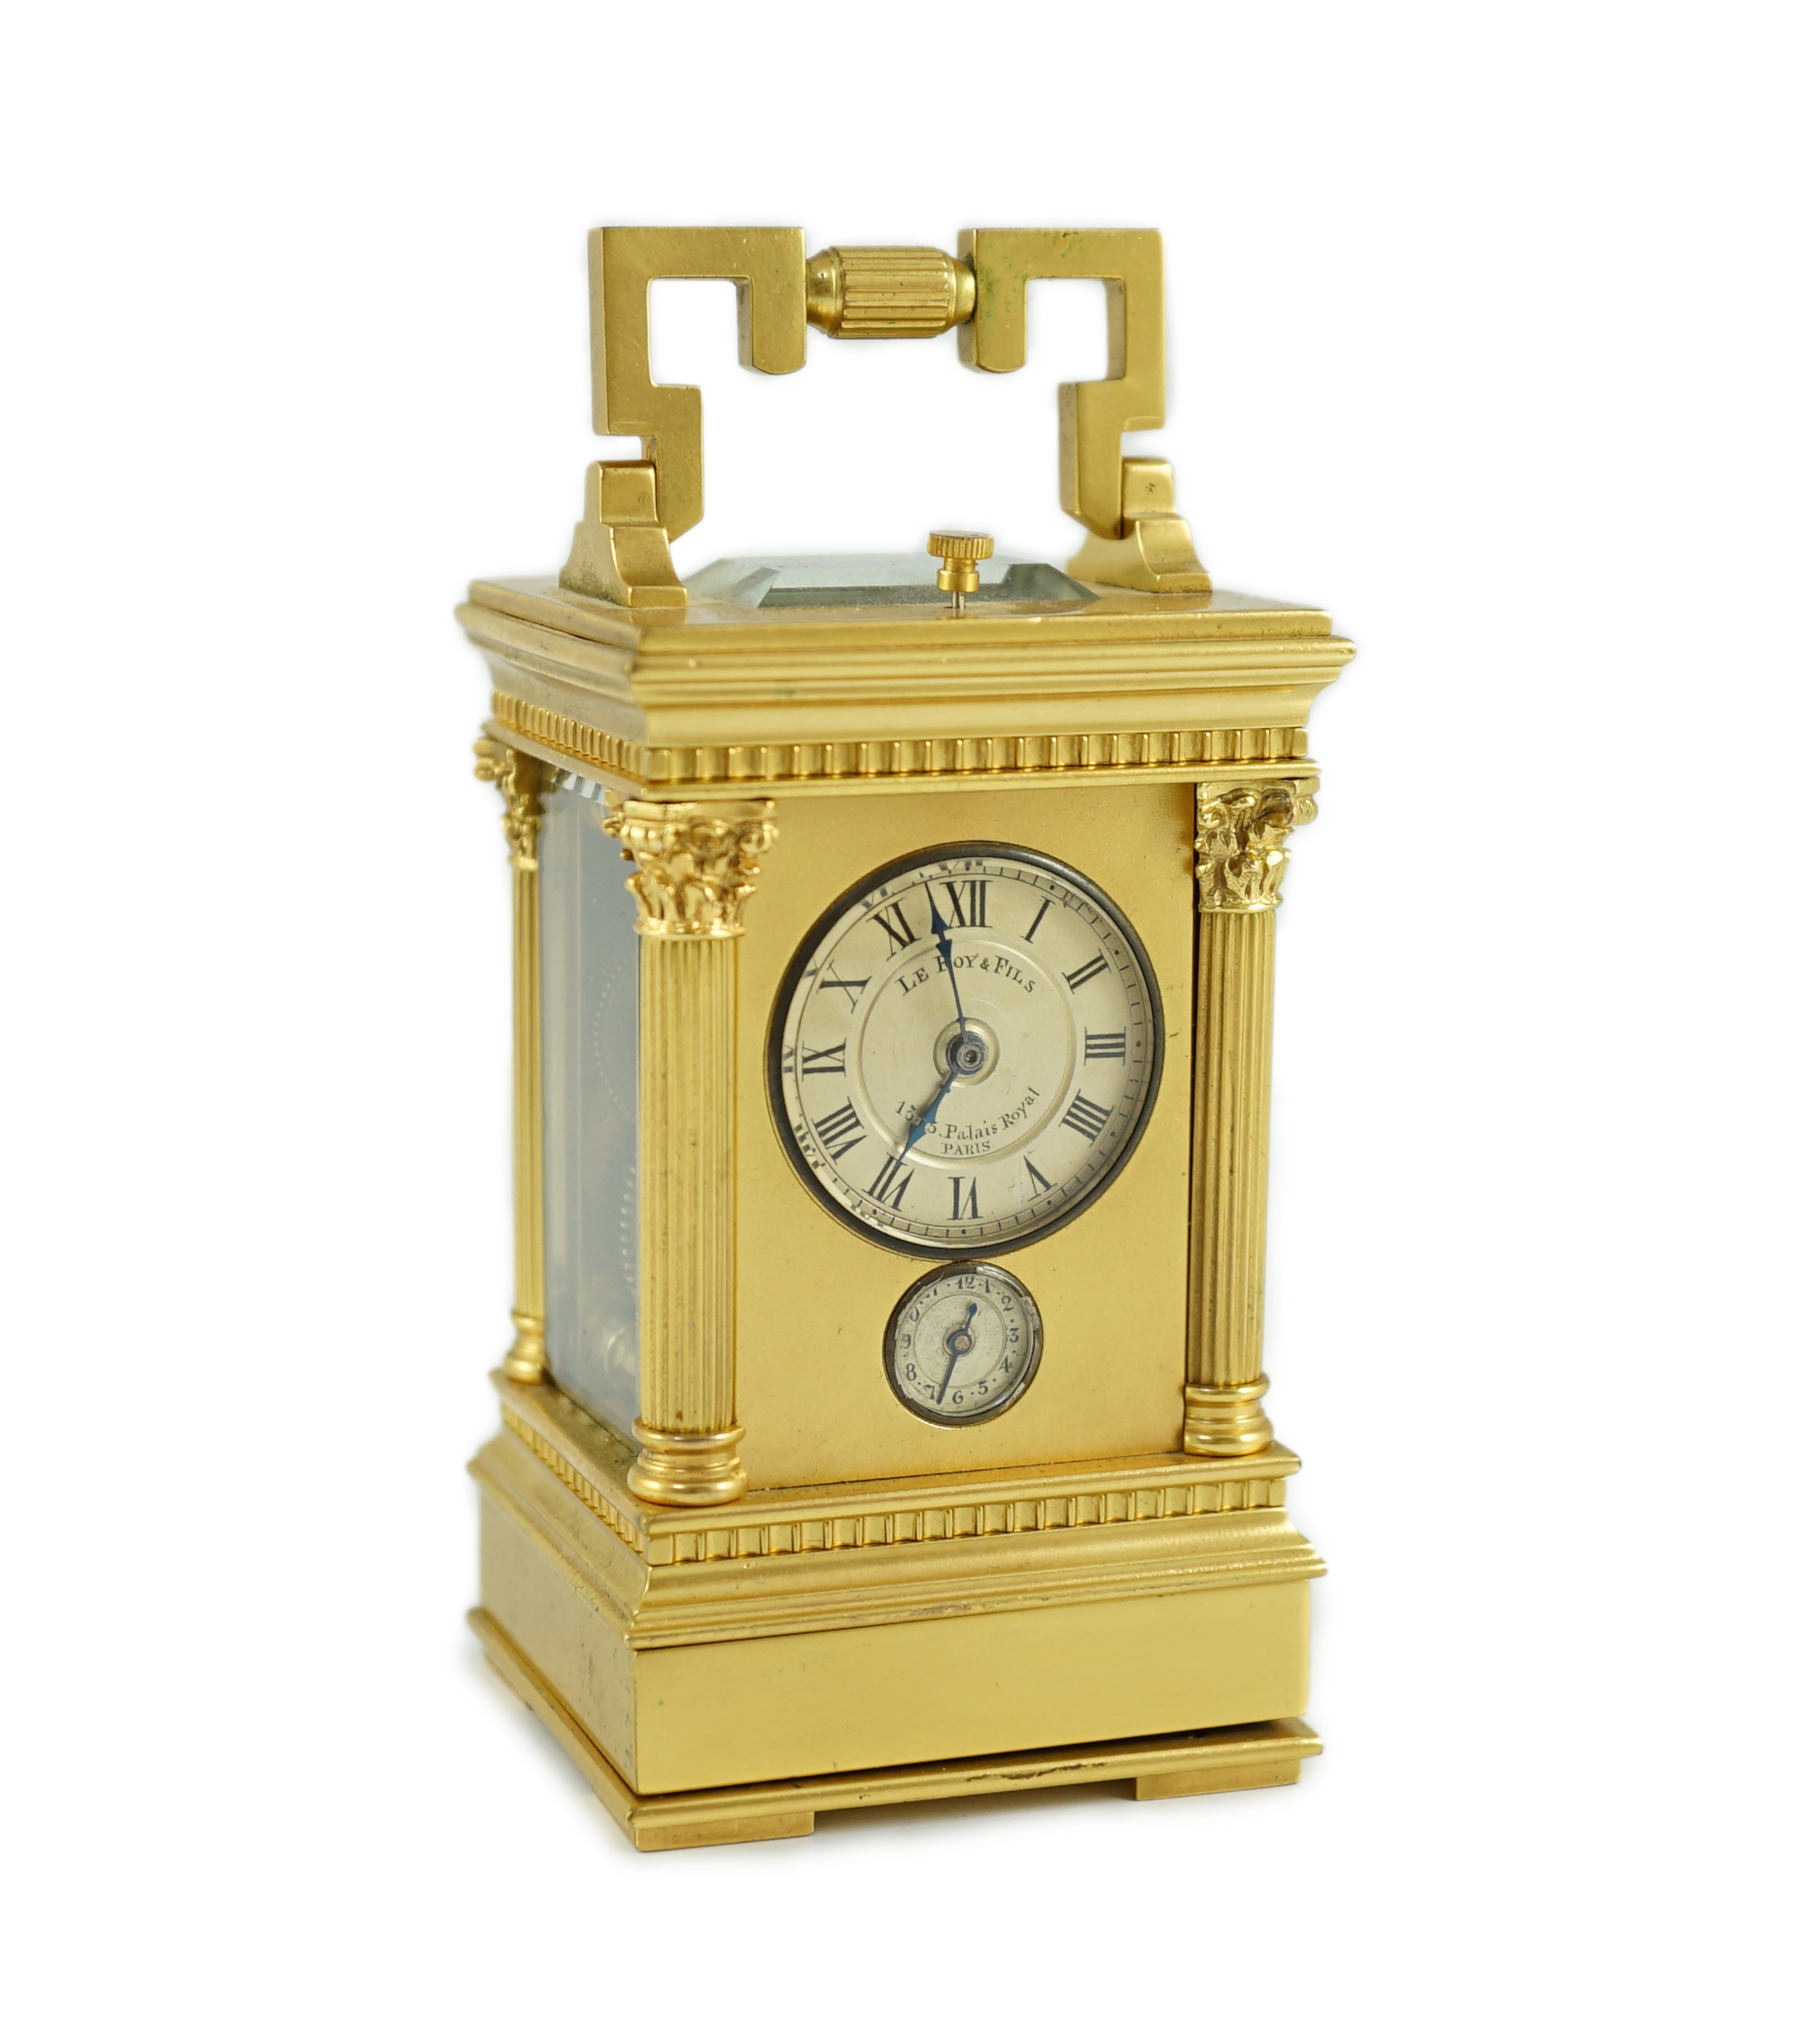 Le Roy & Fils, Palais Royal, Paris. A late 19th century French miniature hour repeating carriage alarm clock                                                                                                                